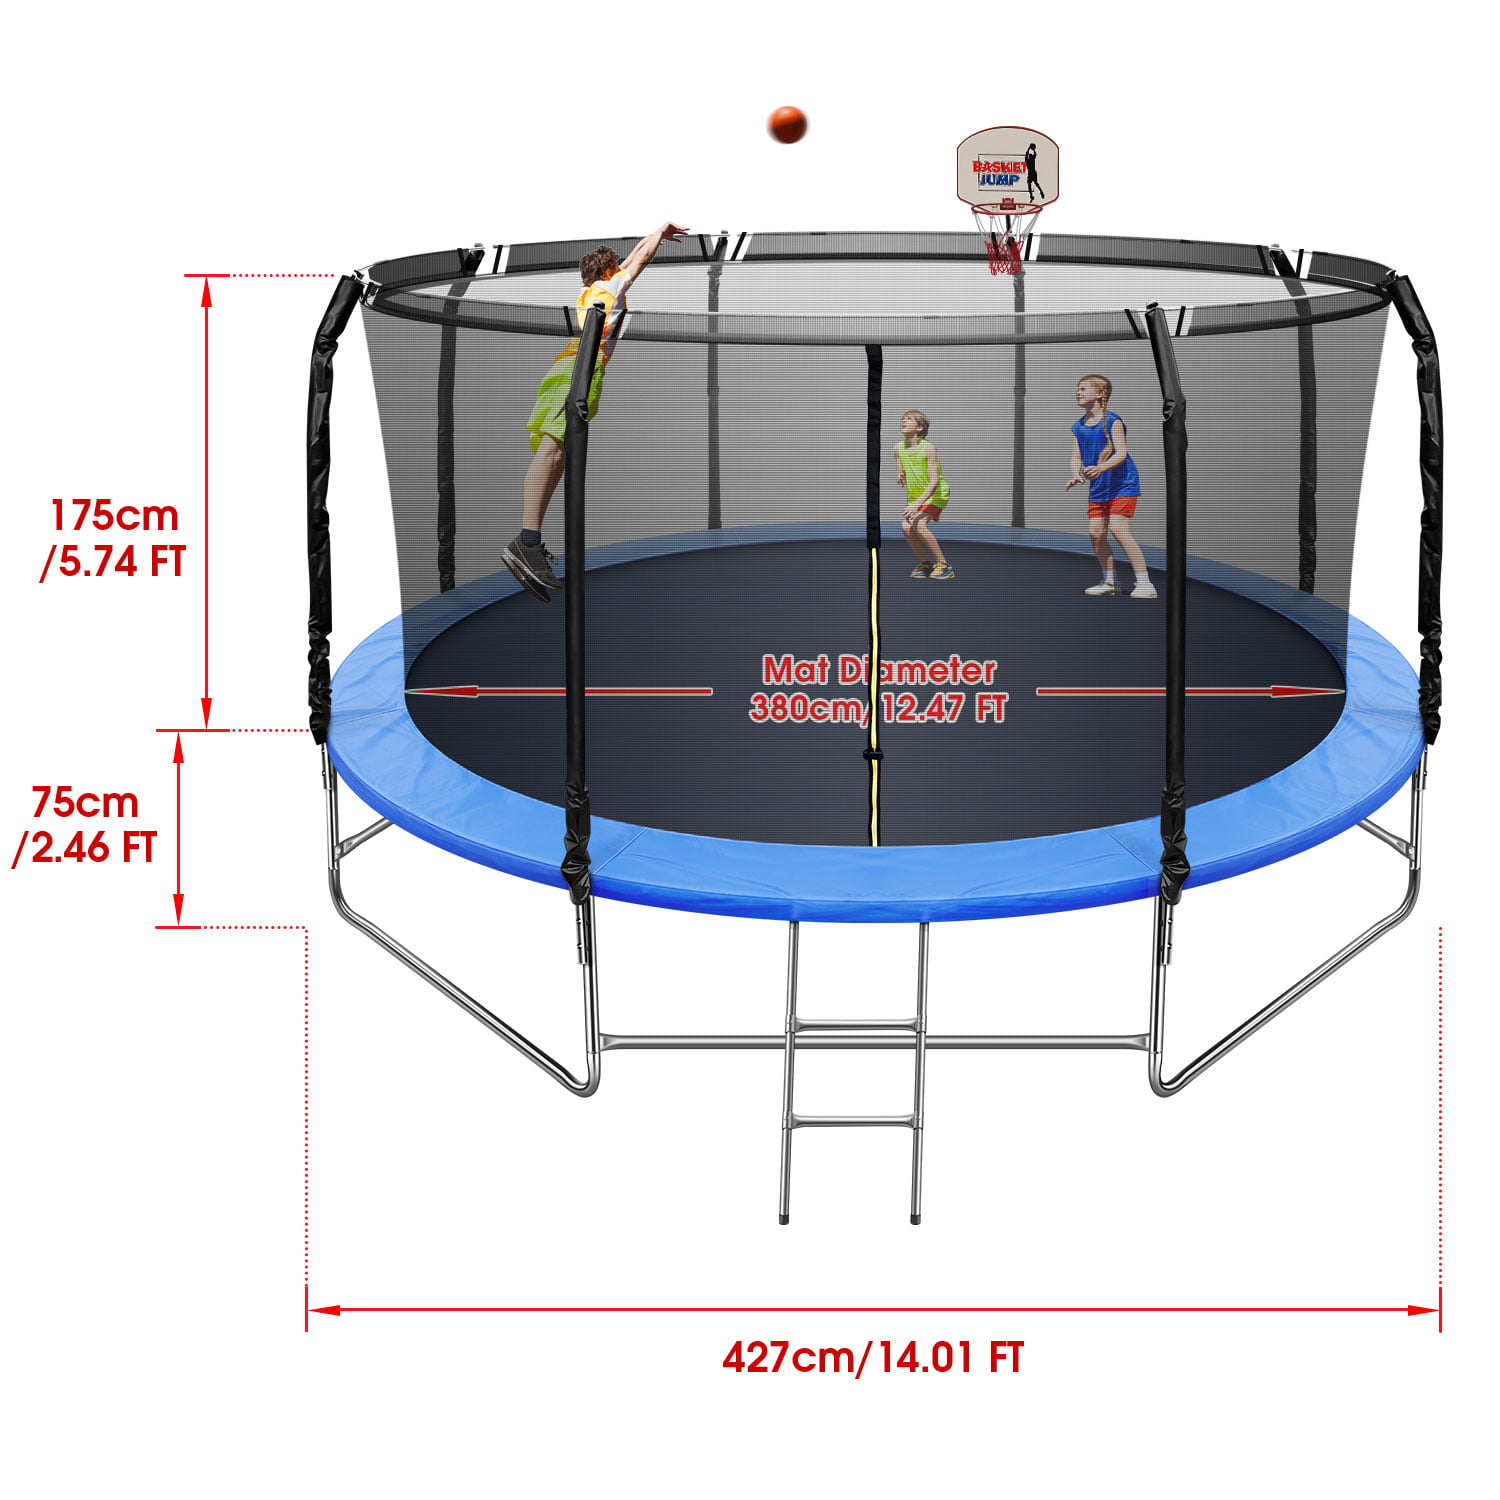 ASTM Approved Tranpoline for 5-6 Kids with LED Tranpoline Light Recreational Tranpoline with Basketball Hoop SKYUP 2022 Upgraded 14FT 1200lbs Tranpoline for Adults Jump Mat Wind Stakes 